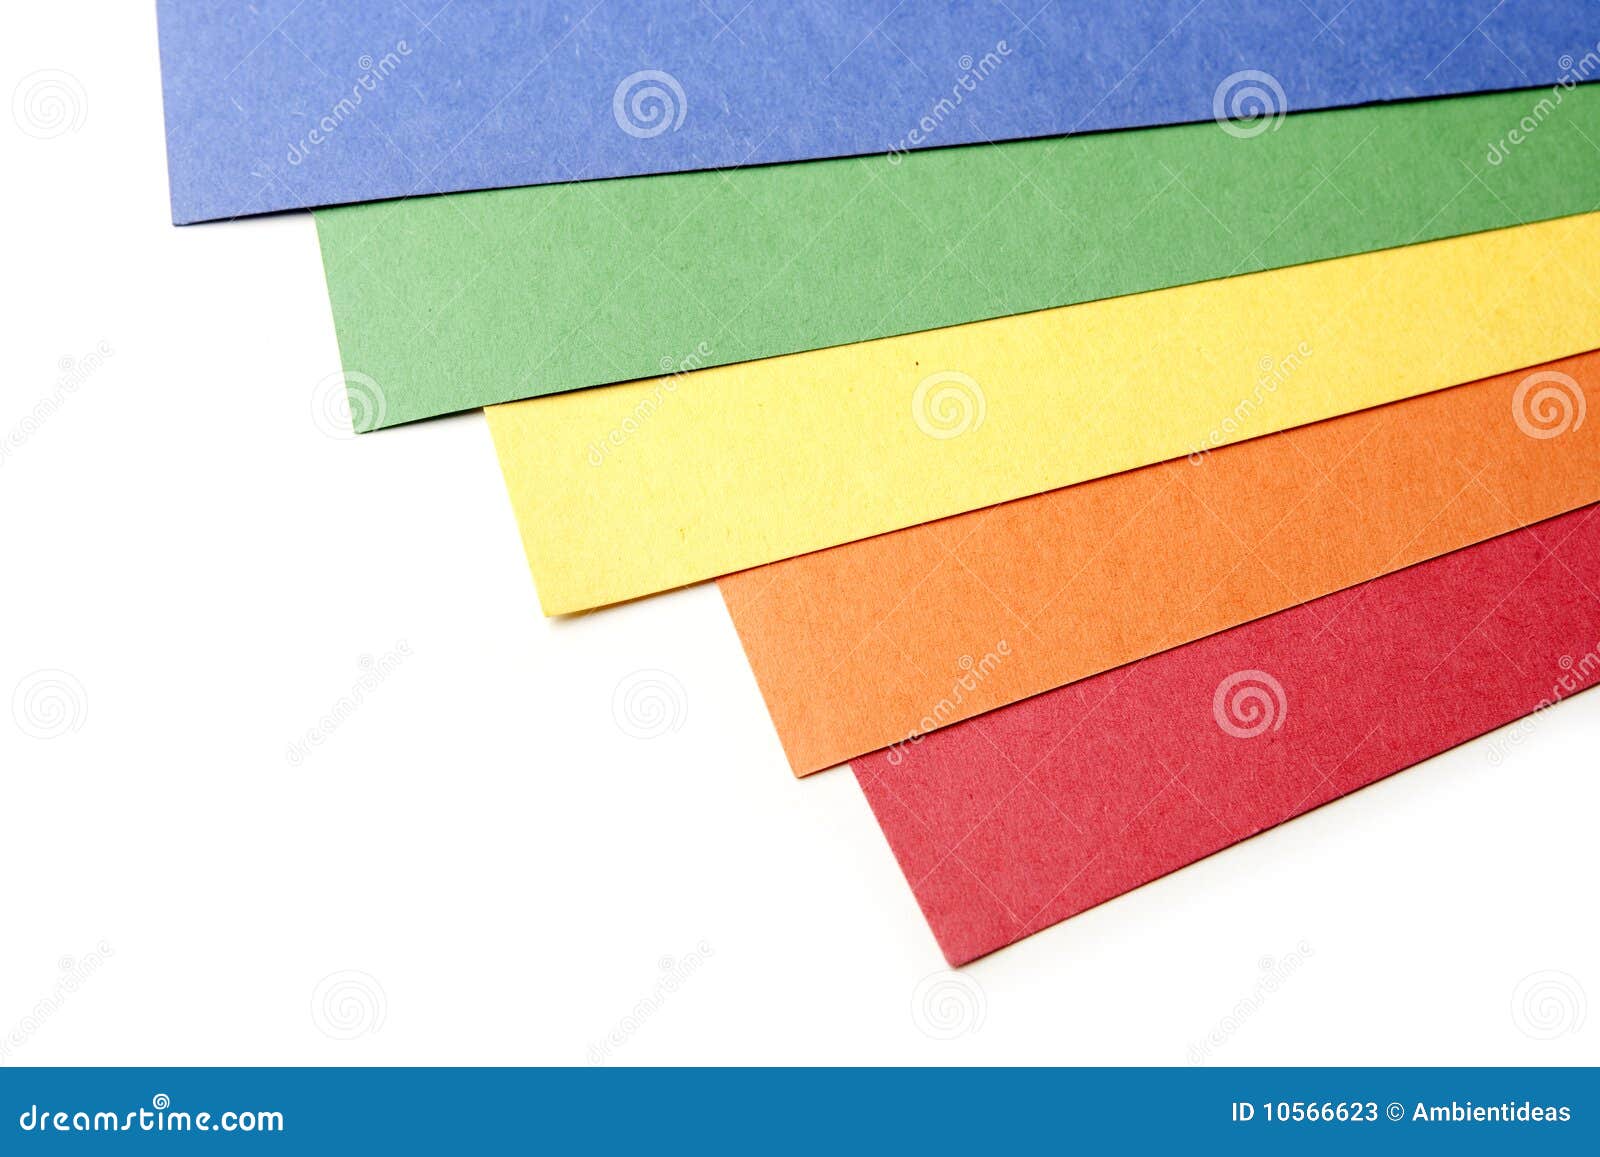 Bright Color Craft Paper Stock Photos - Image: 10566623